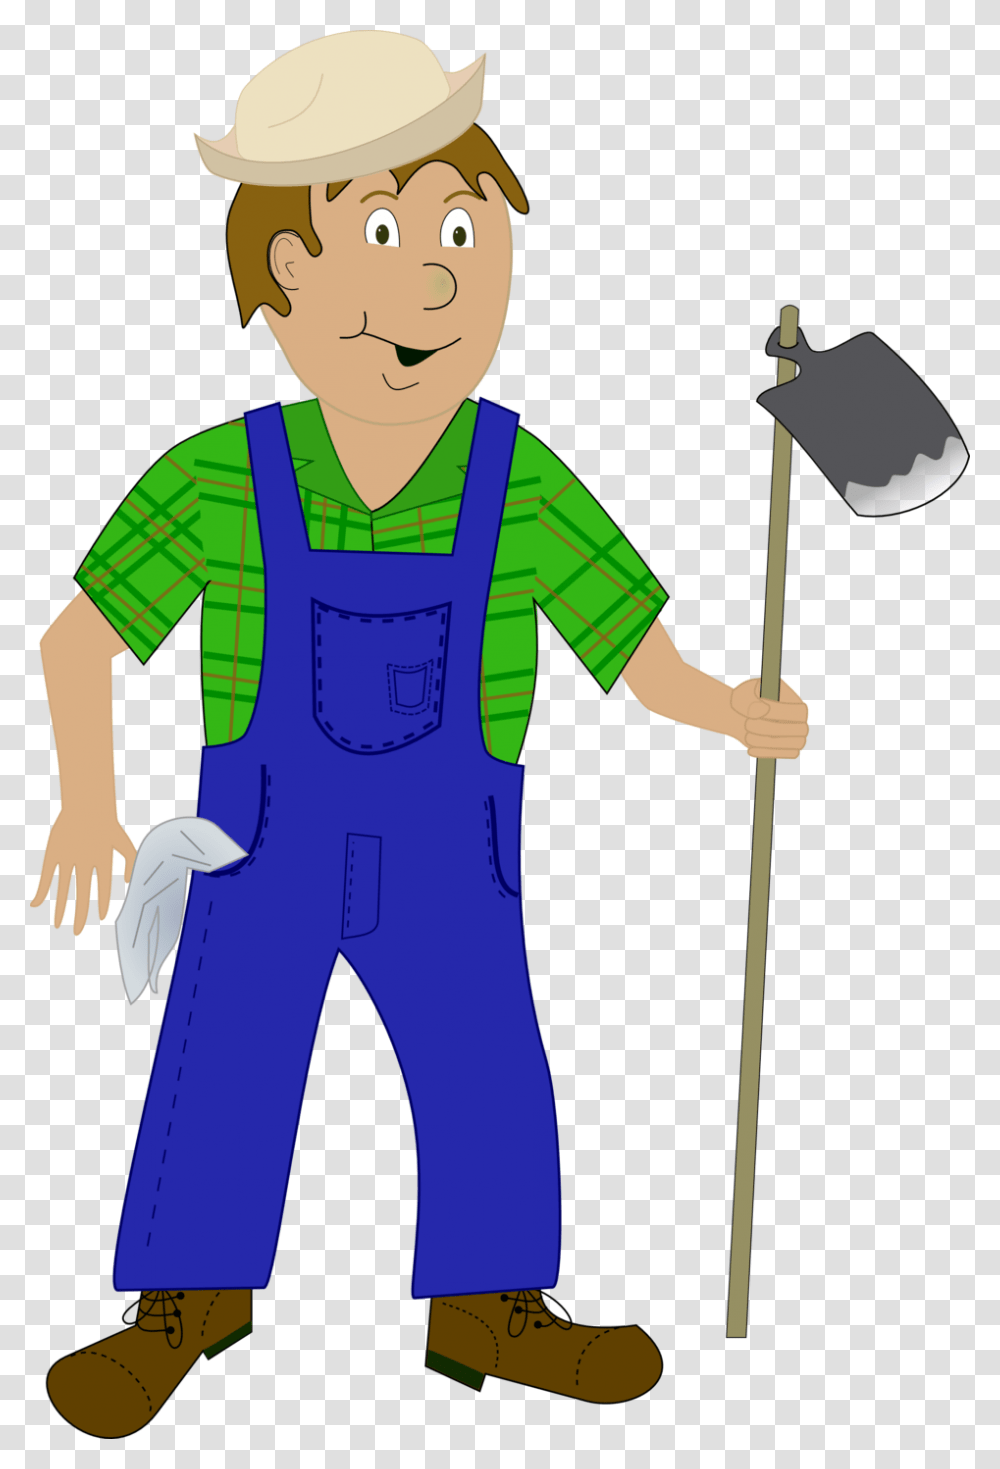 Farmer Agriculture Cartoon Drawing Cc0 Cartoon Farmer No Background, Person, Costume, Performer, Hat Transparent Png